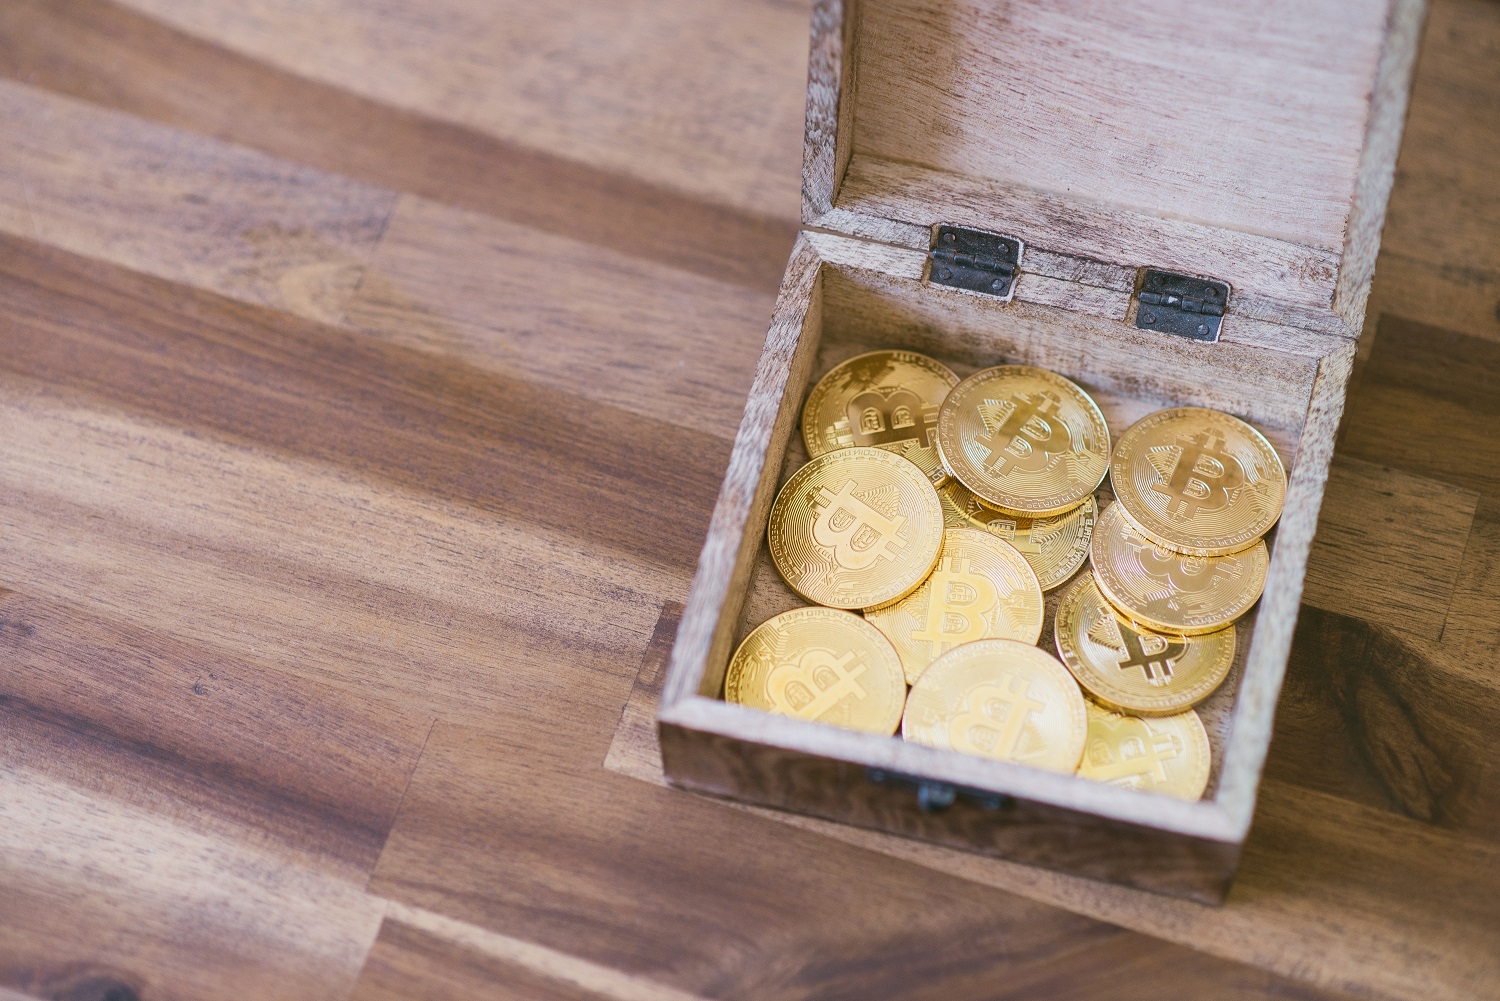 A wooden box containing golden tokens intended to represent Bitcoin on a wooden floor or table.